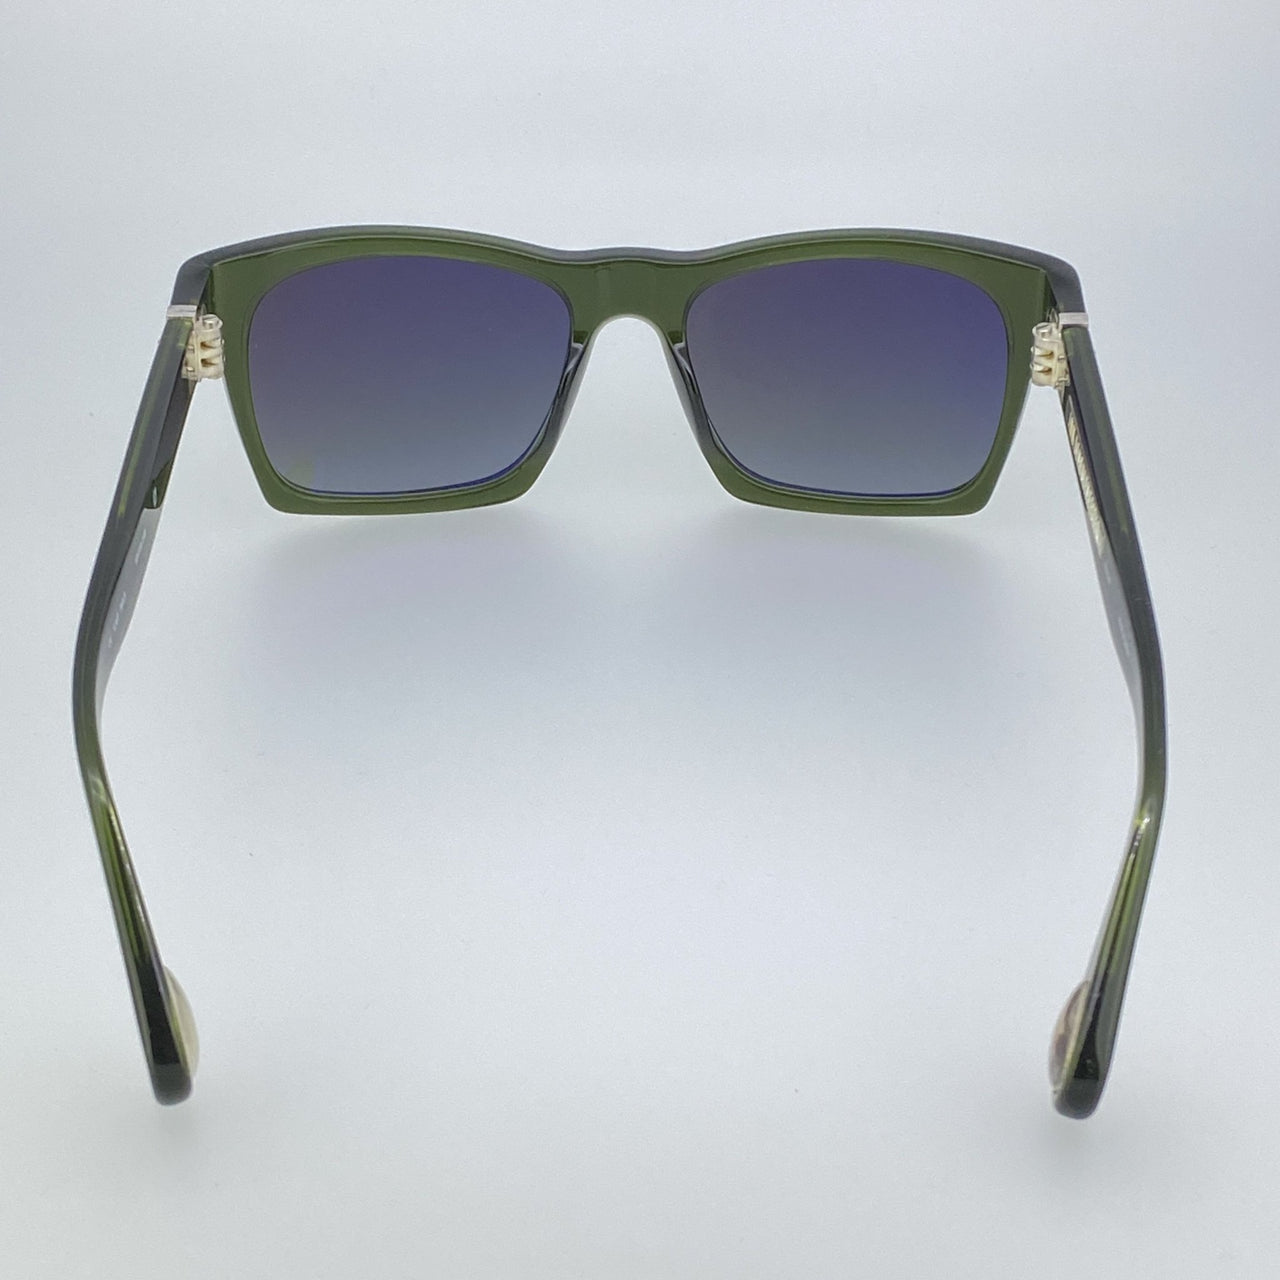 Ann Demeulemeester Sunglasses D-Frame Green 925 Silver with Green Lenses Category 3 Dark Tint AD3C7SUN - Watches & Crystals